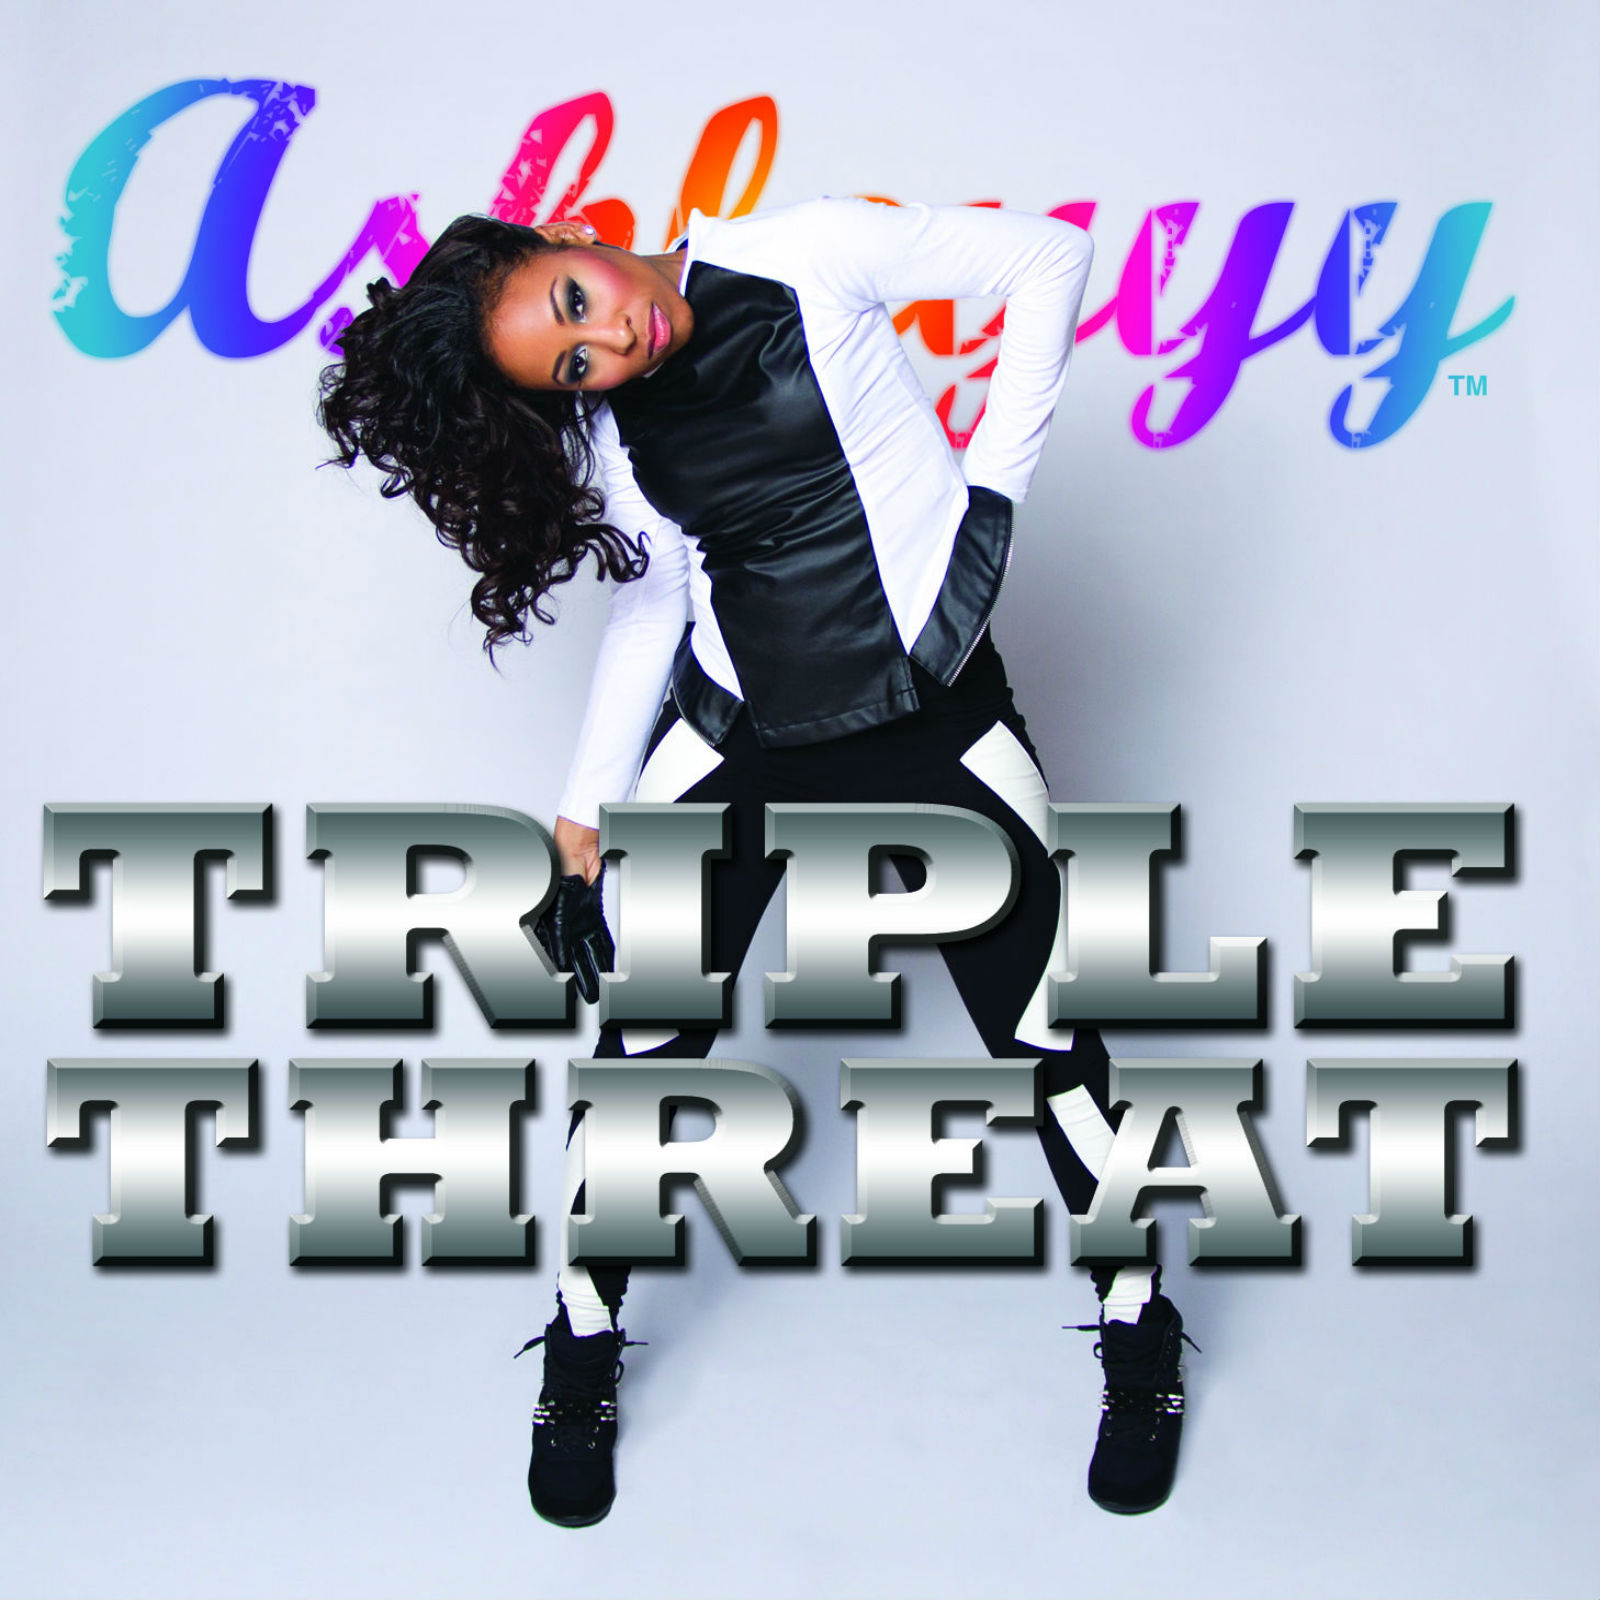 My New Album “Triple Threat” is Available Now!